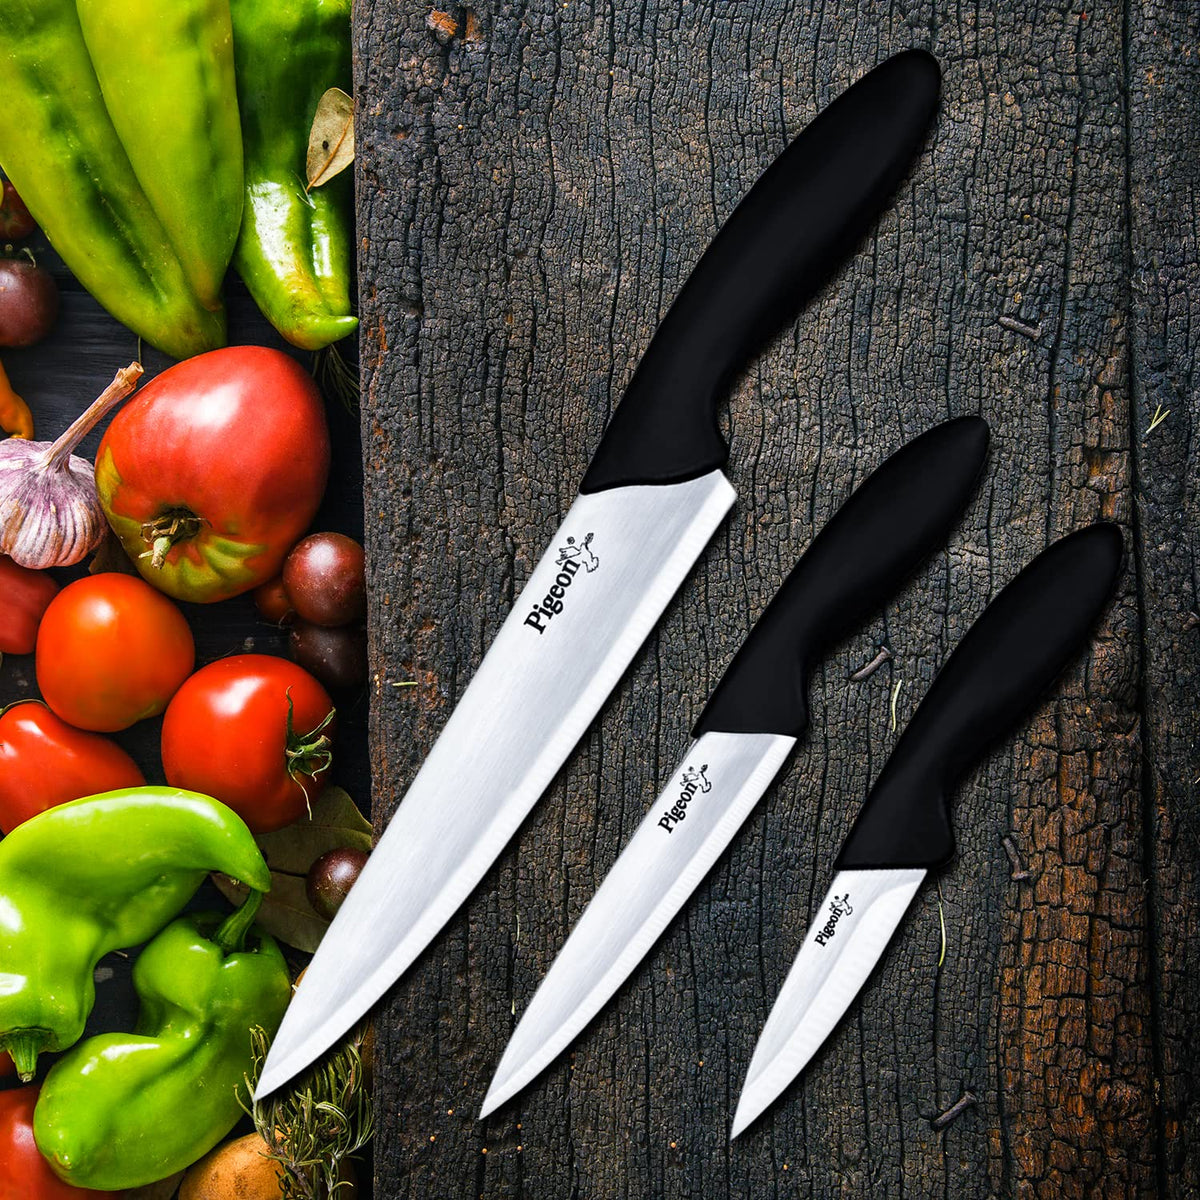  NEW Ceramic Knives With Covers 4 Pcs Quality Kitchen Knife Set  with Stain Resistant 6 inch Chef Knife, 5 inch Steak Knife, 4 inch Fruit  Knife, Peeler (Green): Home & Kitchen